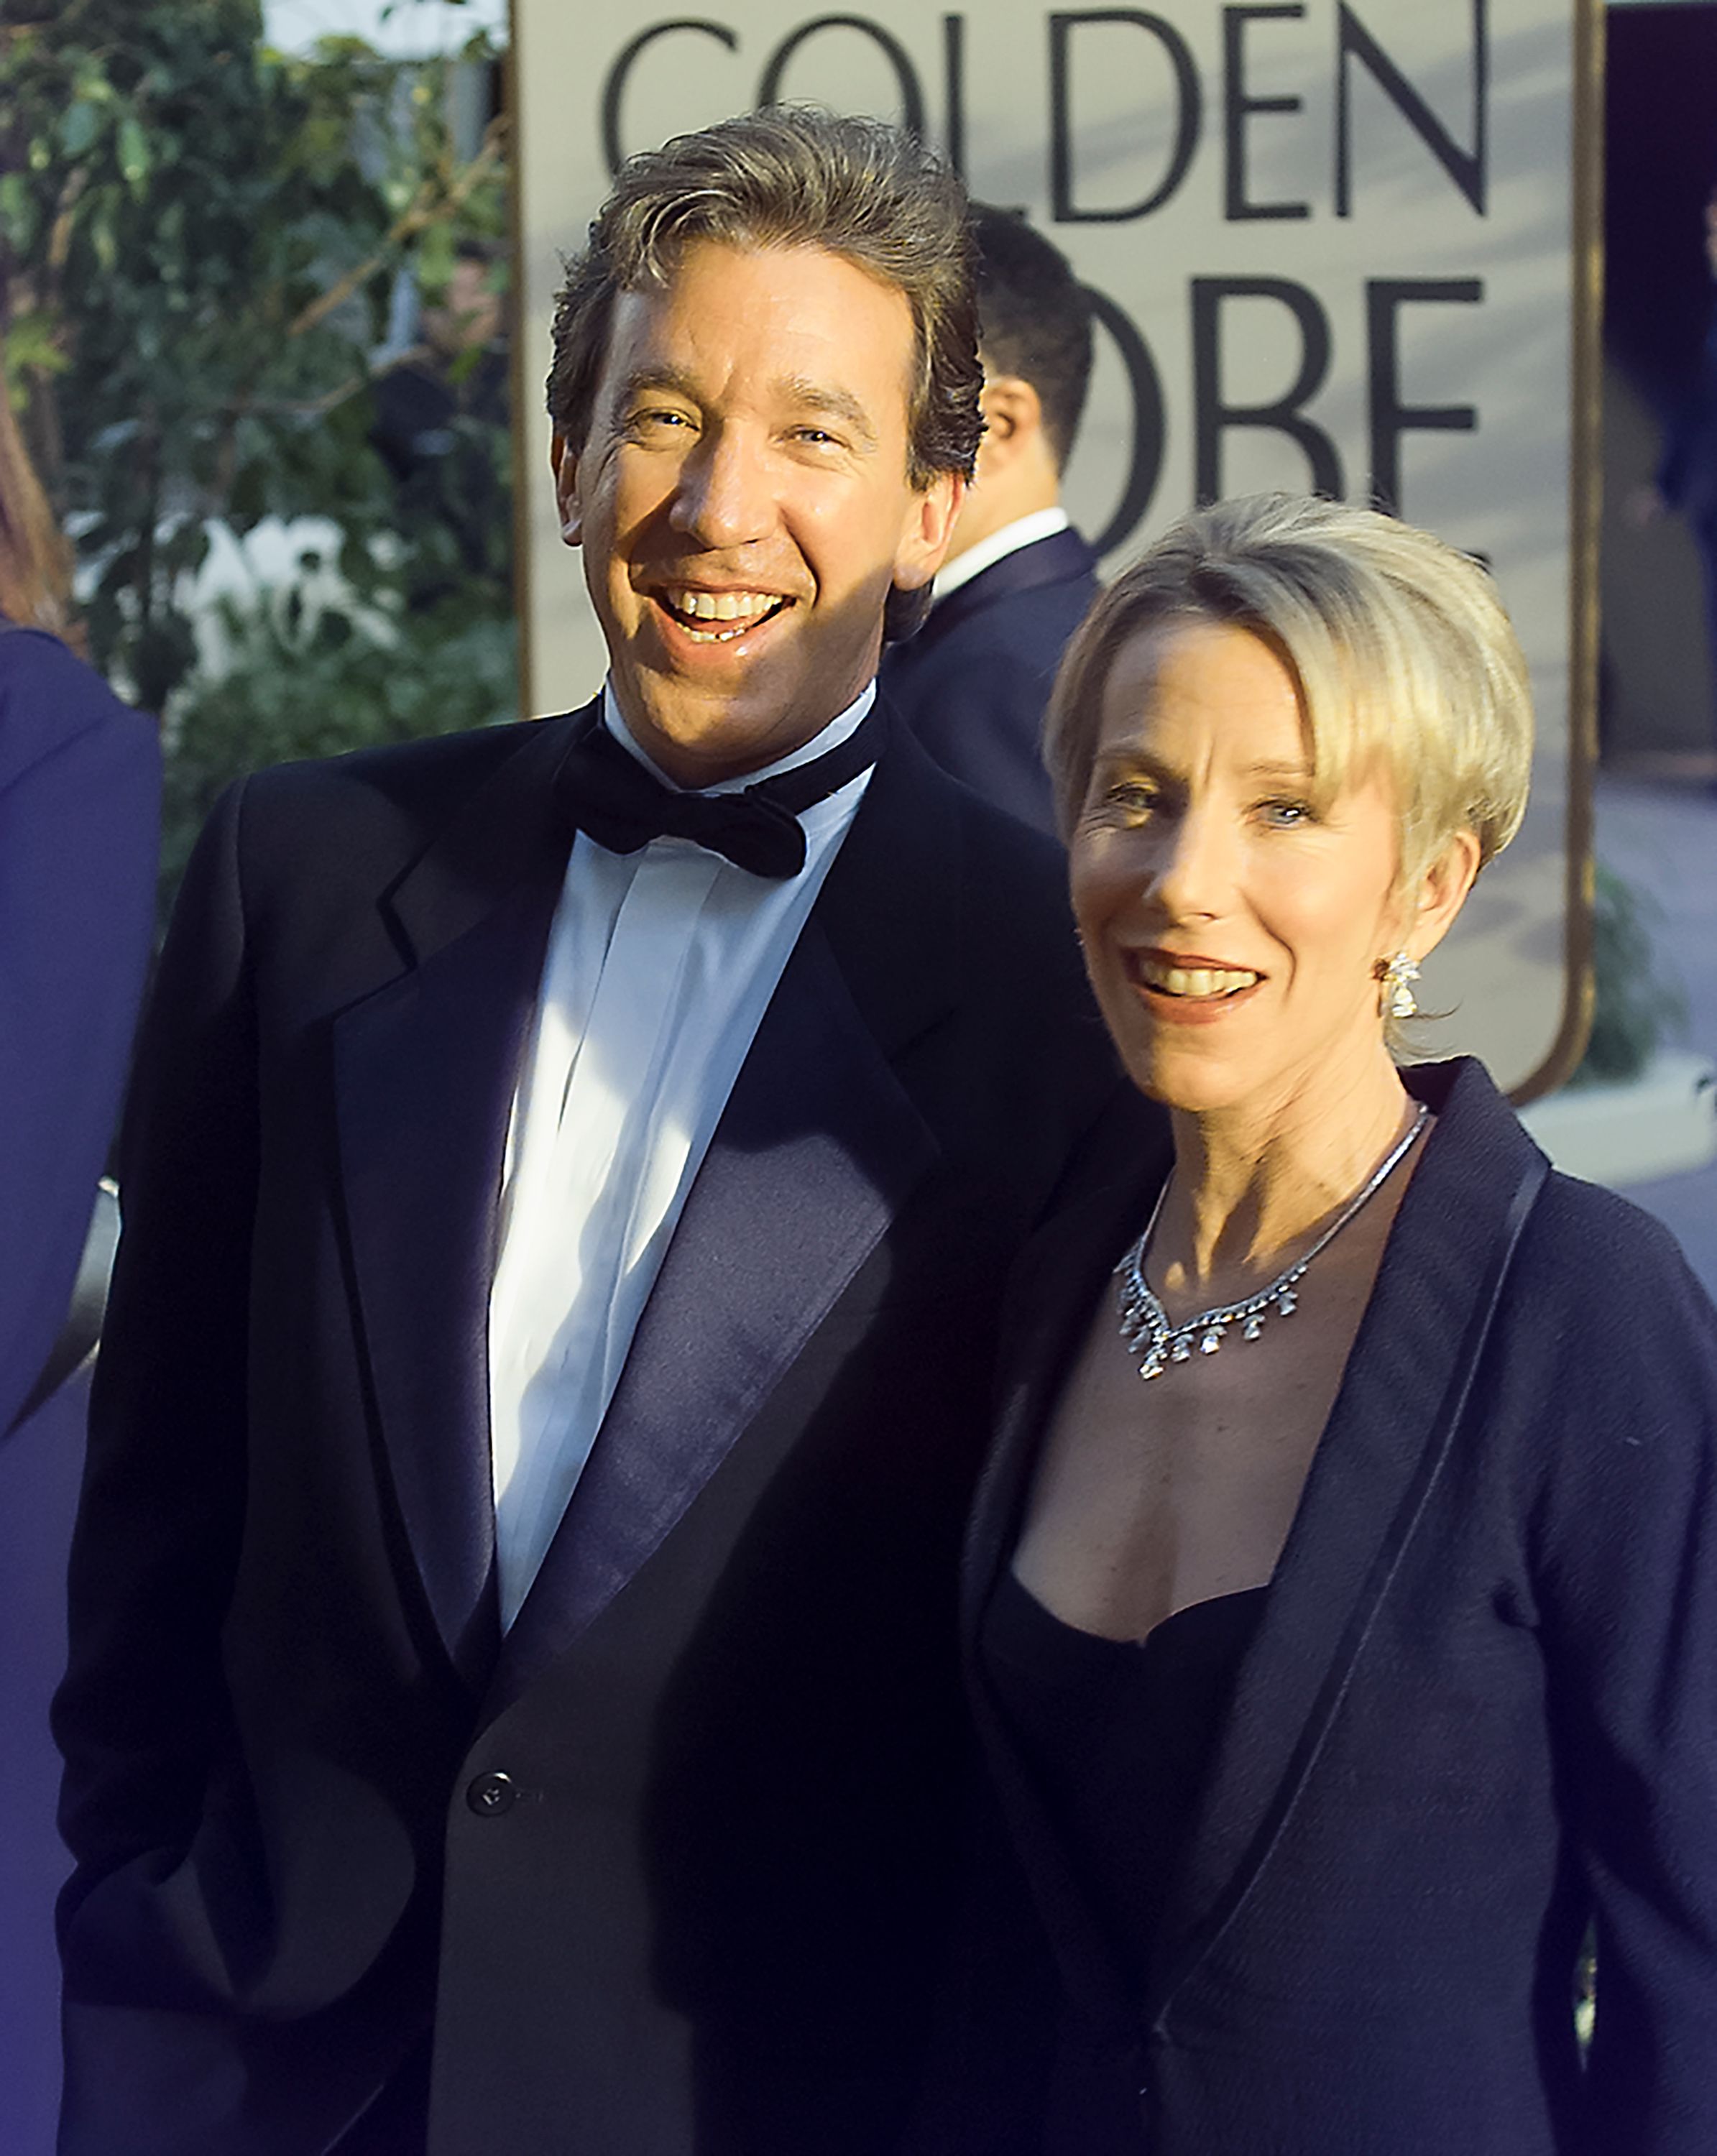 Tim Allen and Laura Deibel during the Golden Globe Awards Show, January 19, 1997 in Beverly Hills, California. | Source: Getty Images